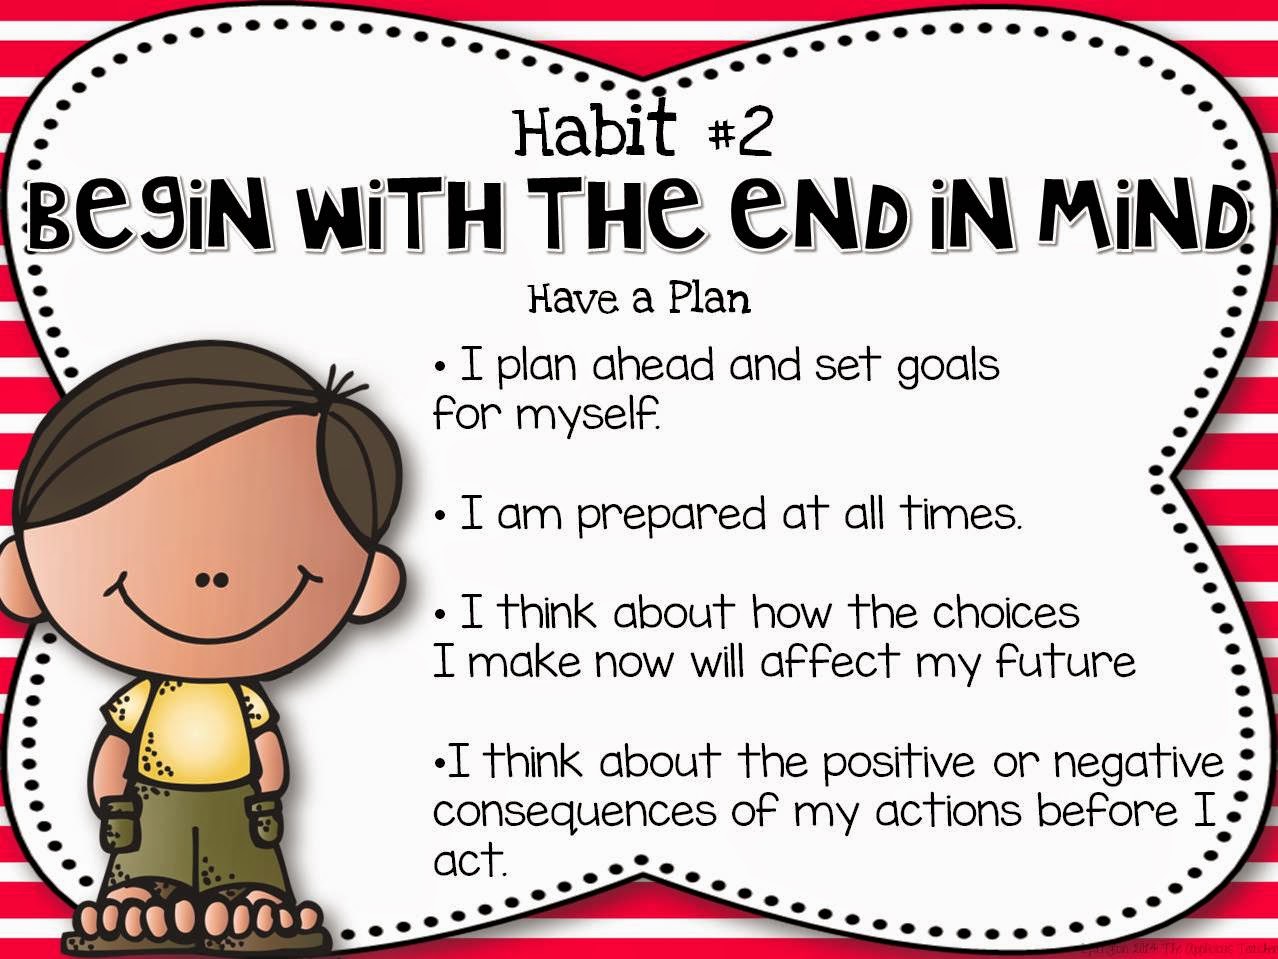 Exploring the 7 Habits: Begin With the End in Mind - iLEAD Lancaster